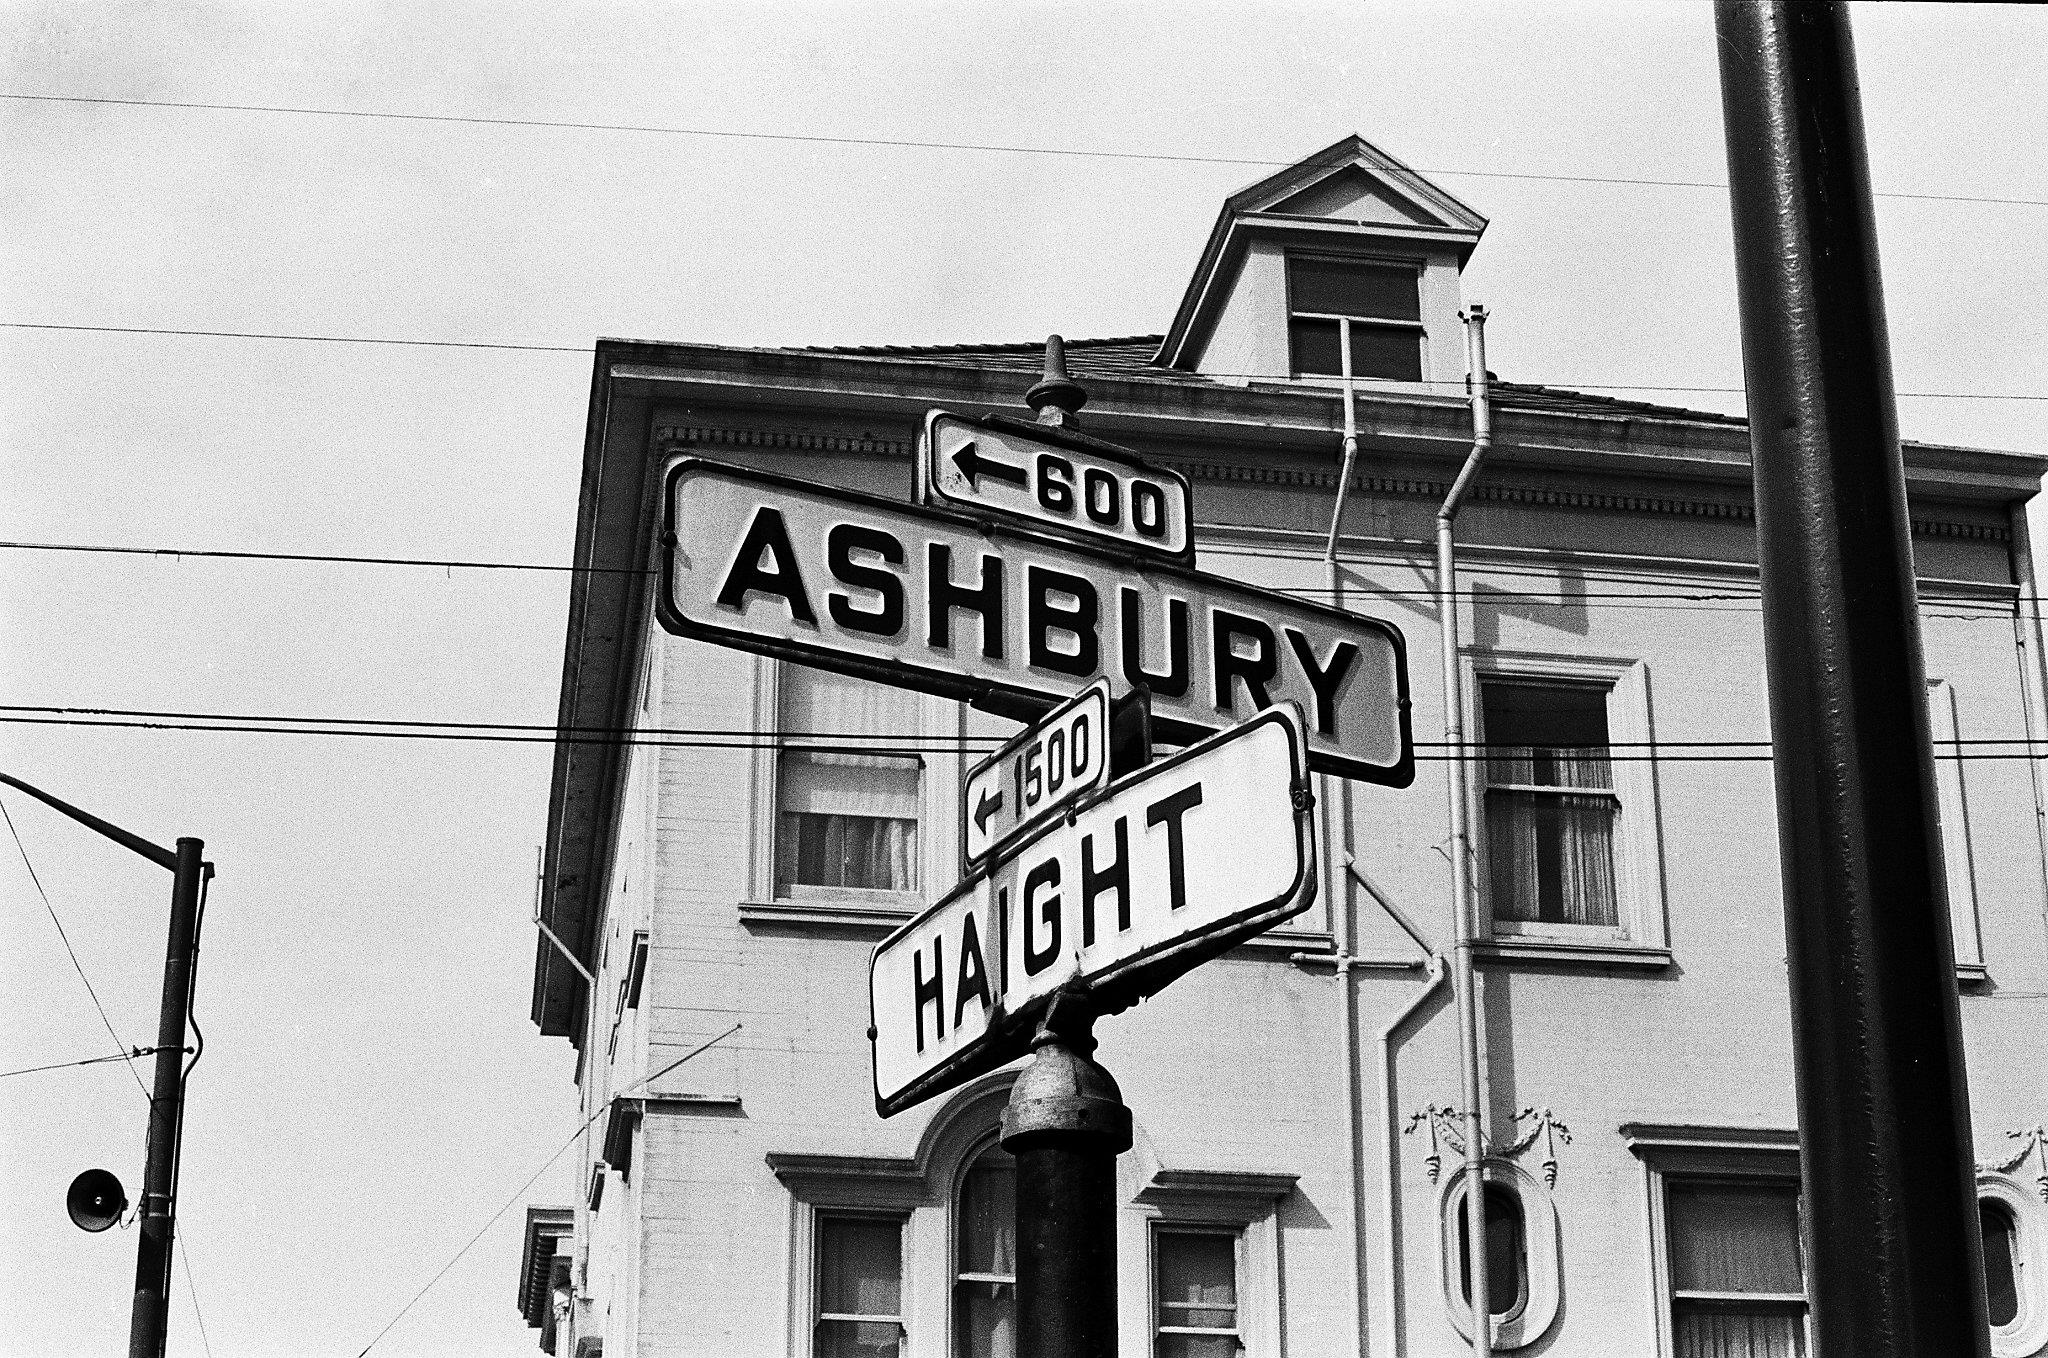 Now and then: Haight-Ashbury